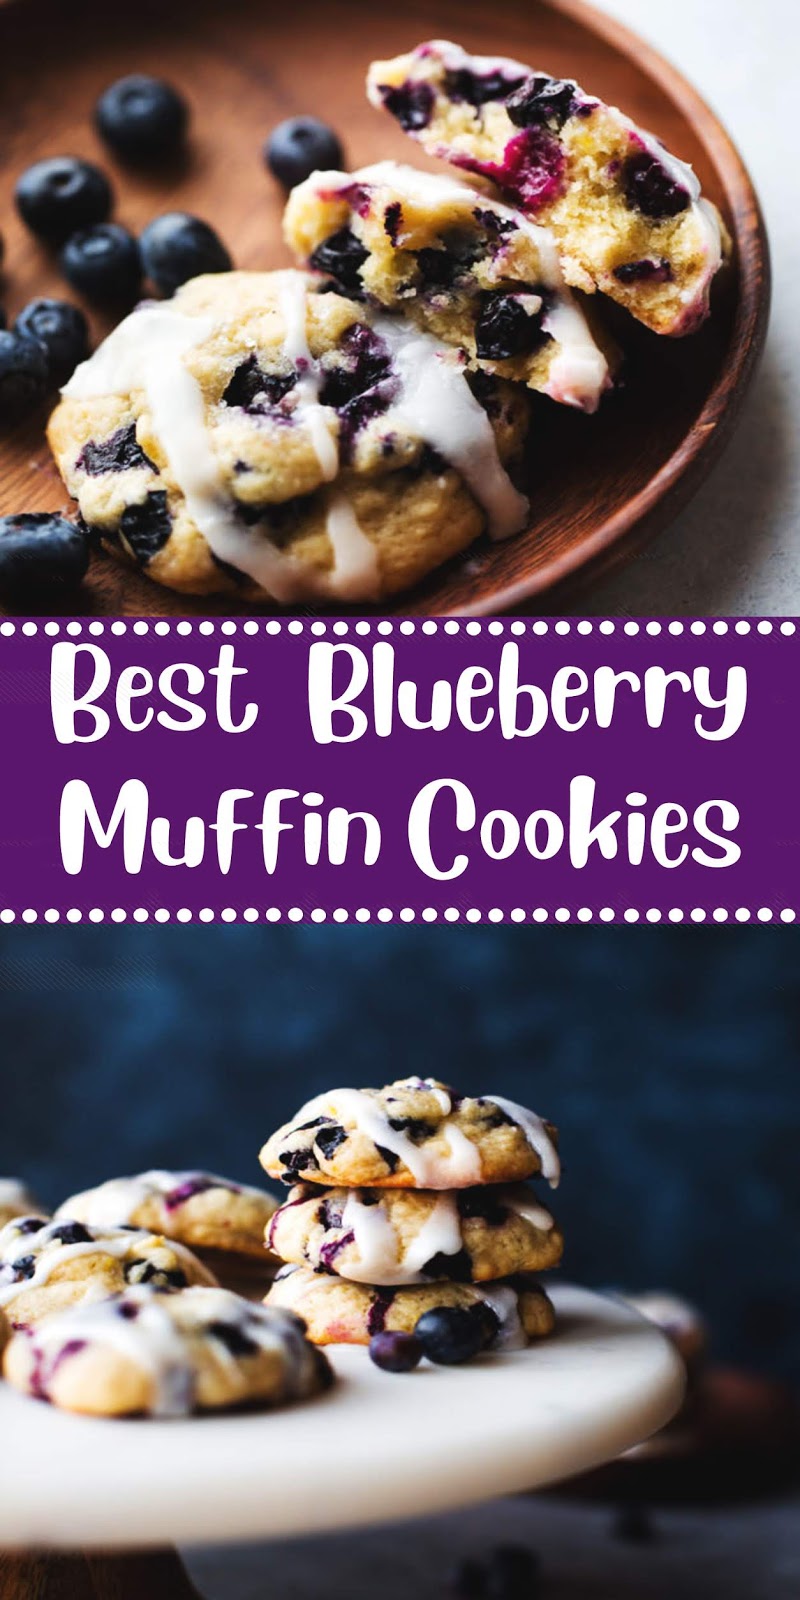 Best Blueberry Muffin Cookies - Jolly Lotus